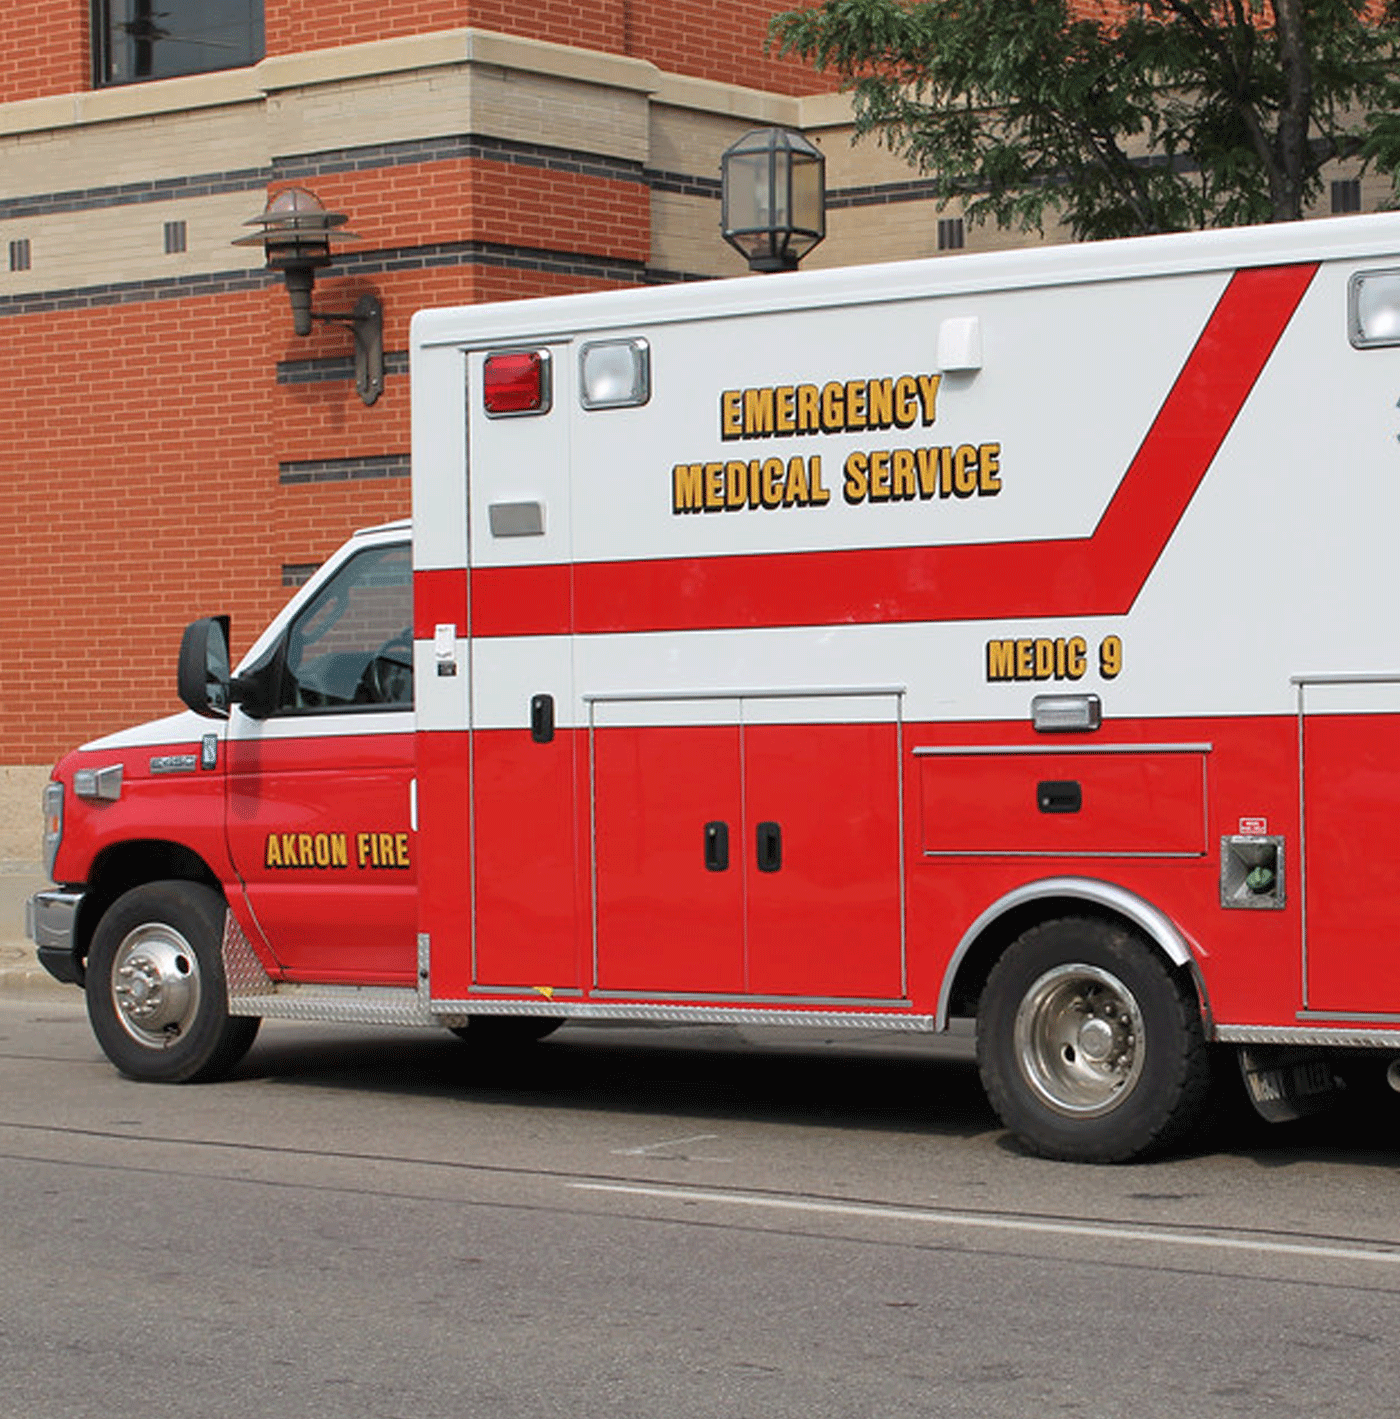 A large red and white ambulance parked in front of a medical facility.